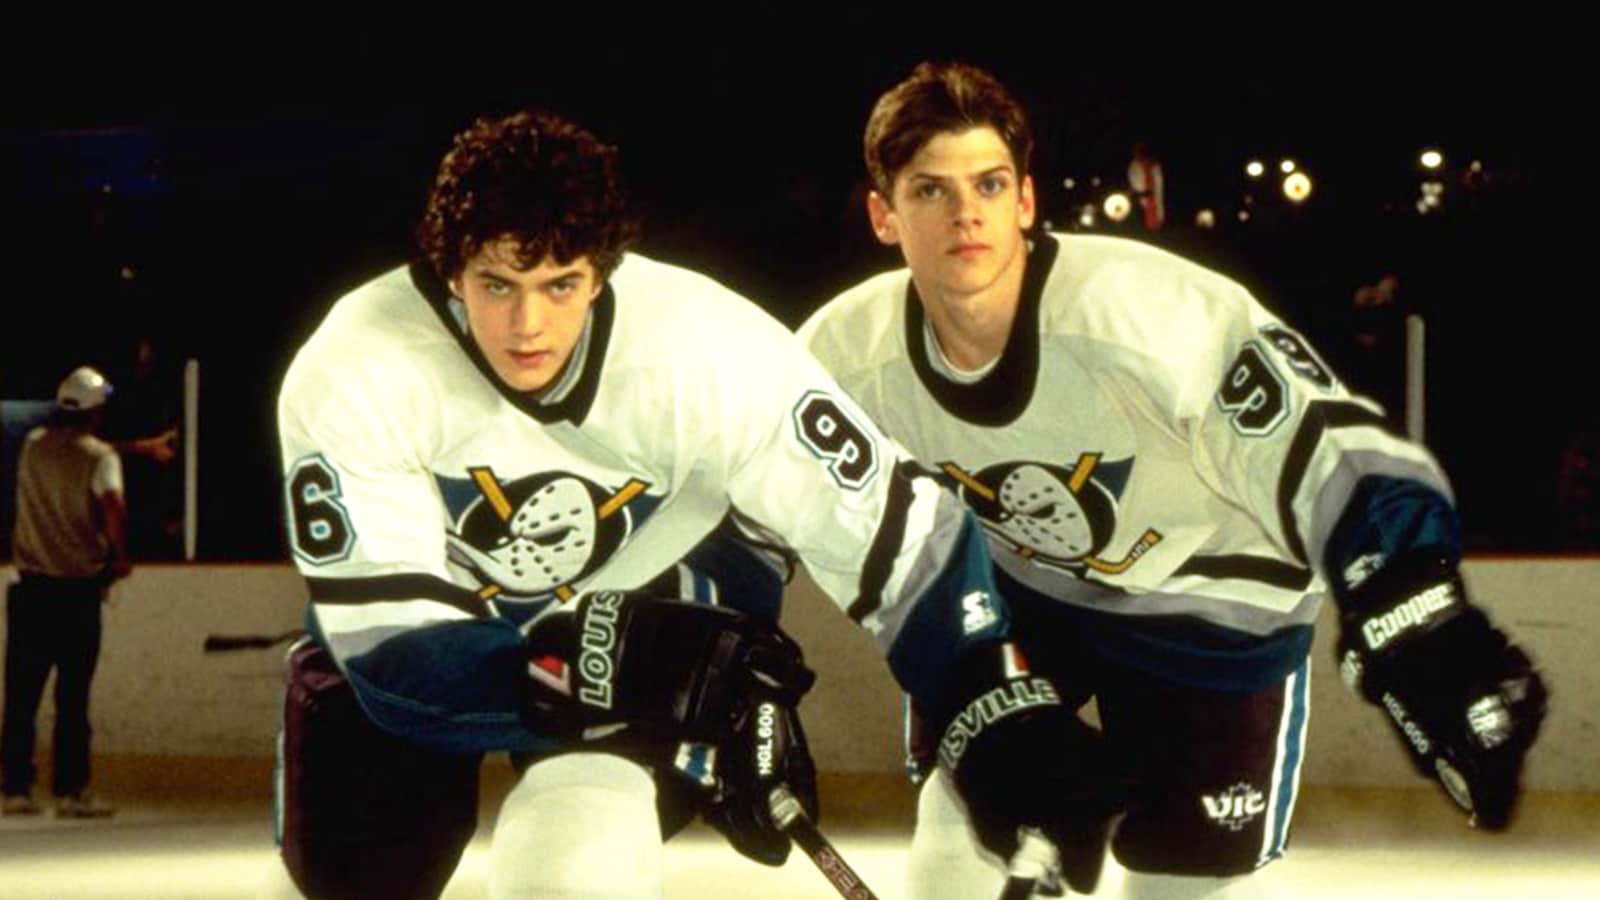 d3-the-mighty-ducks-1996